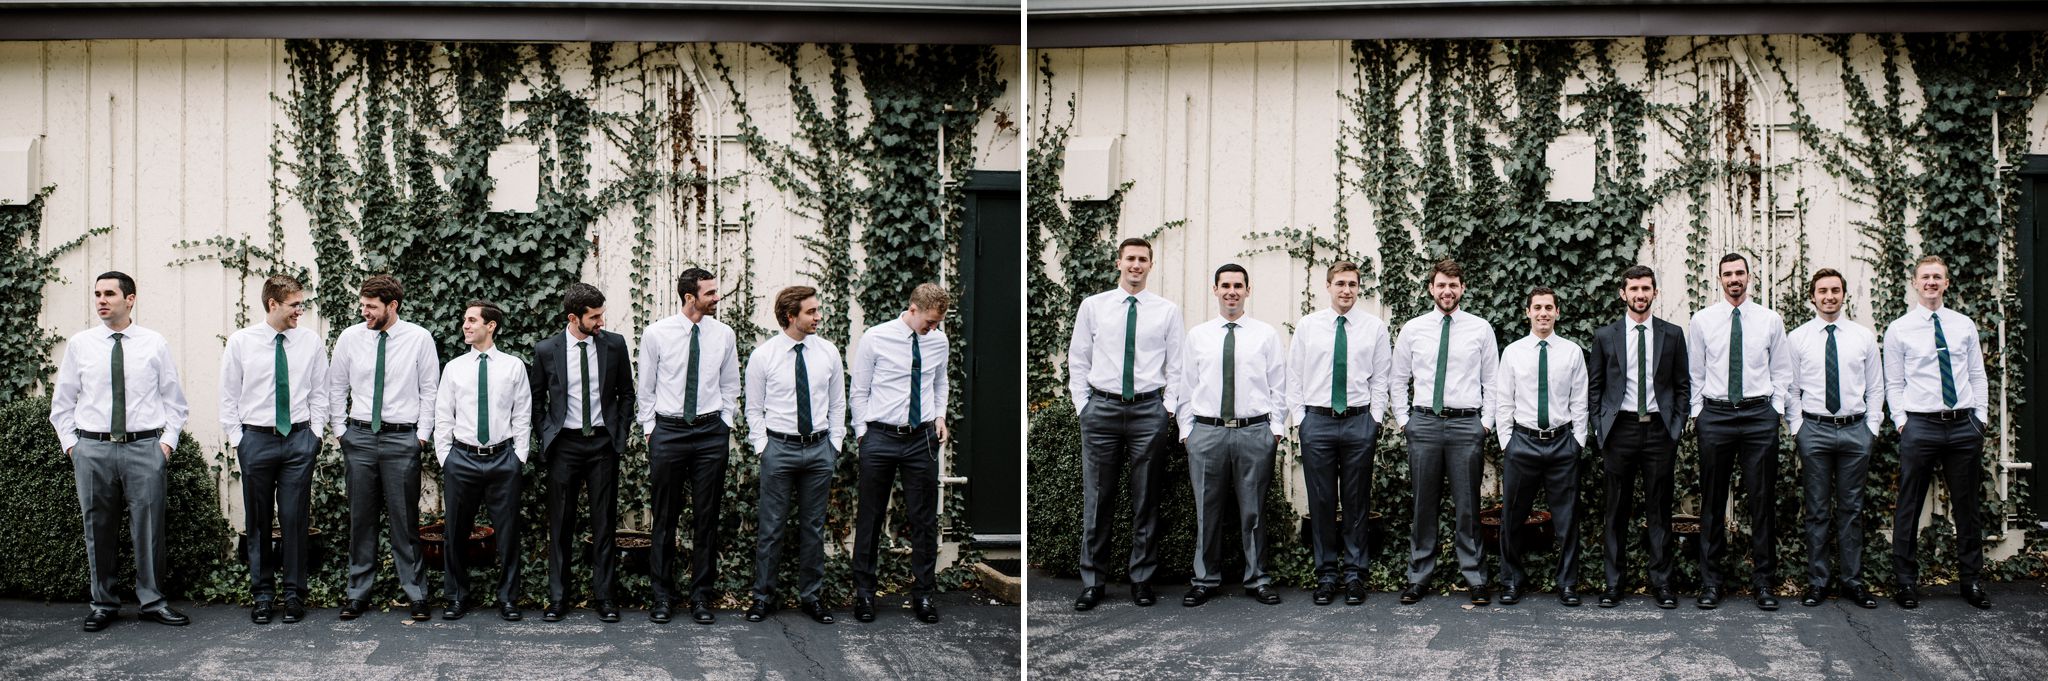 Groom and Groomsmen stand in a line in front of the barn at The Larimore House